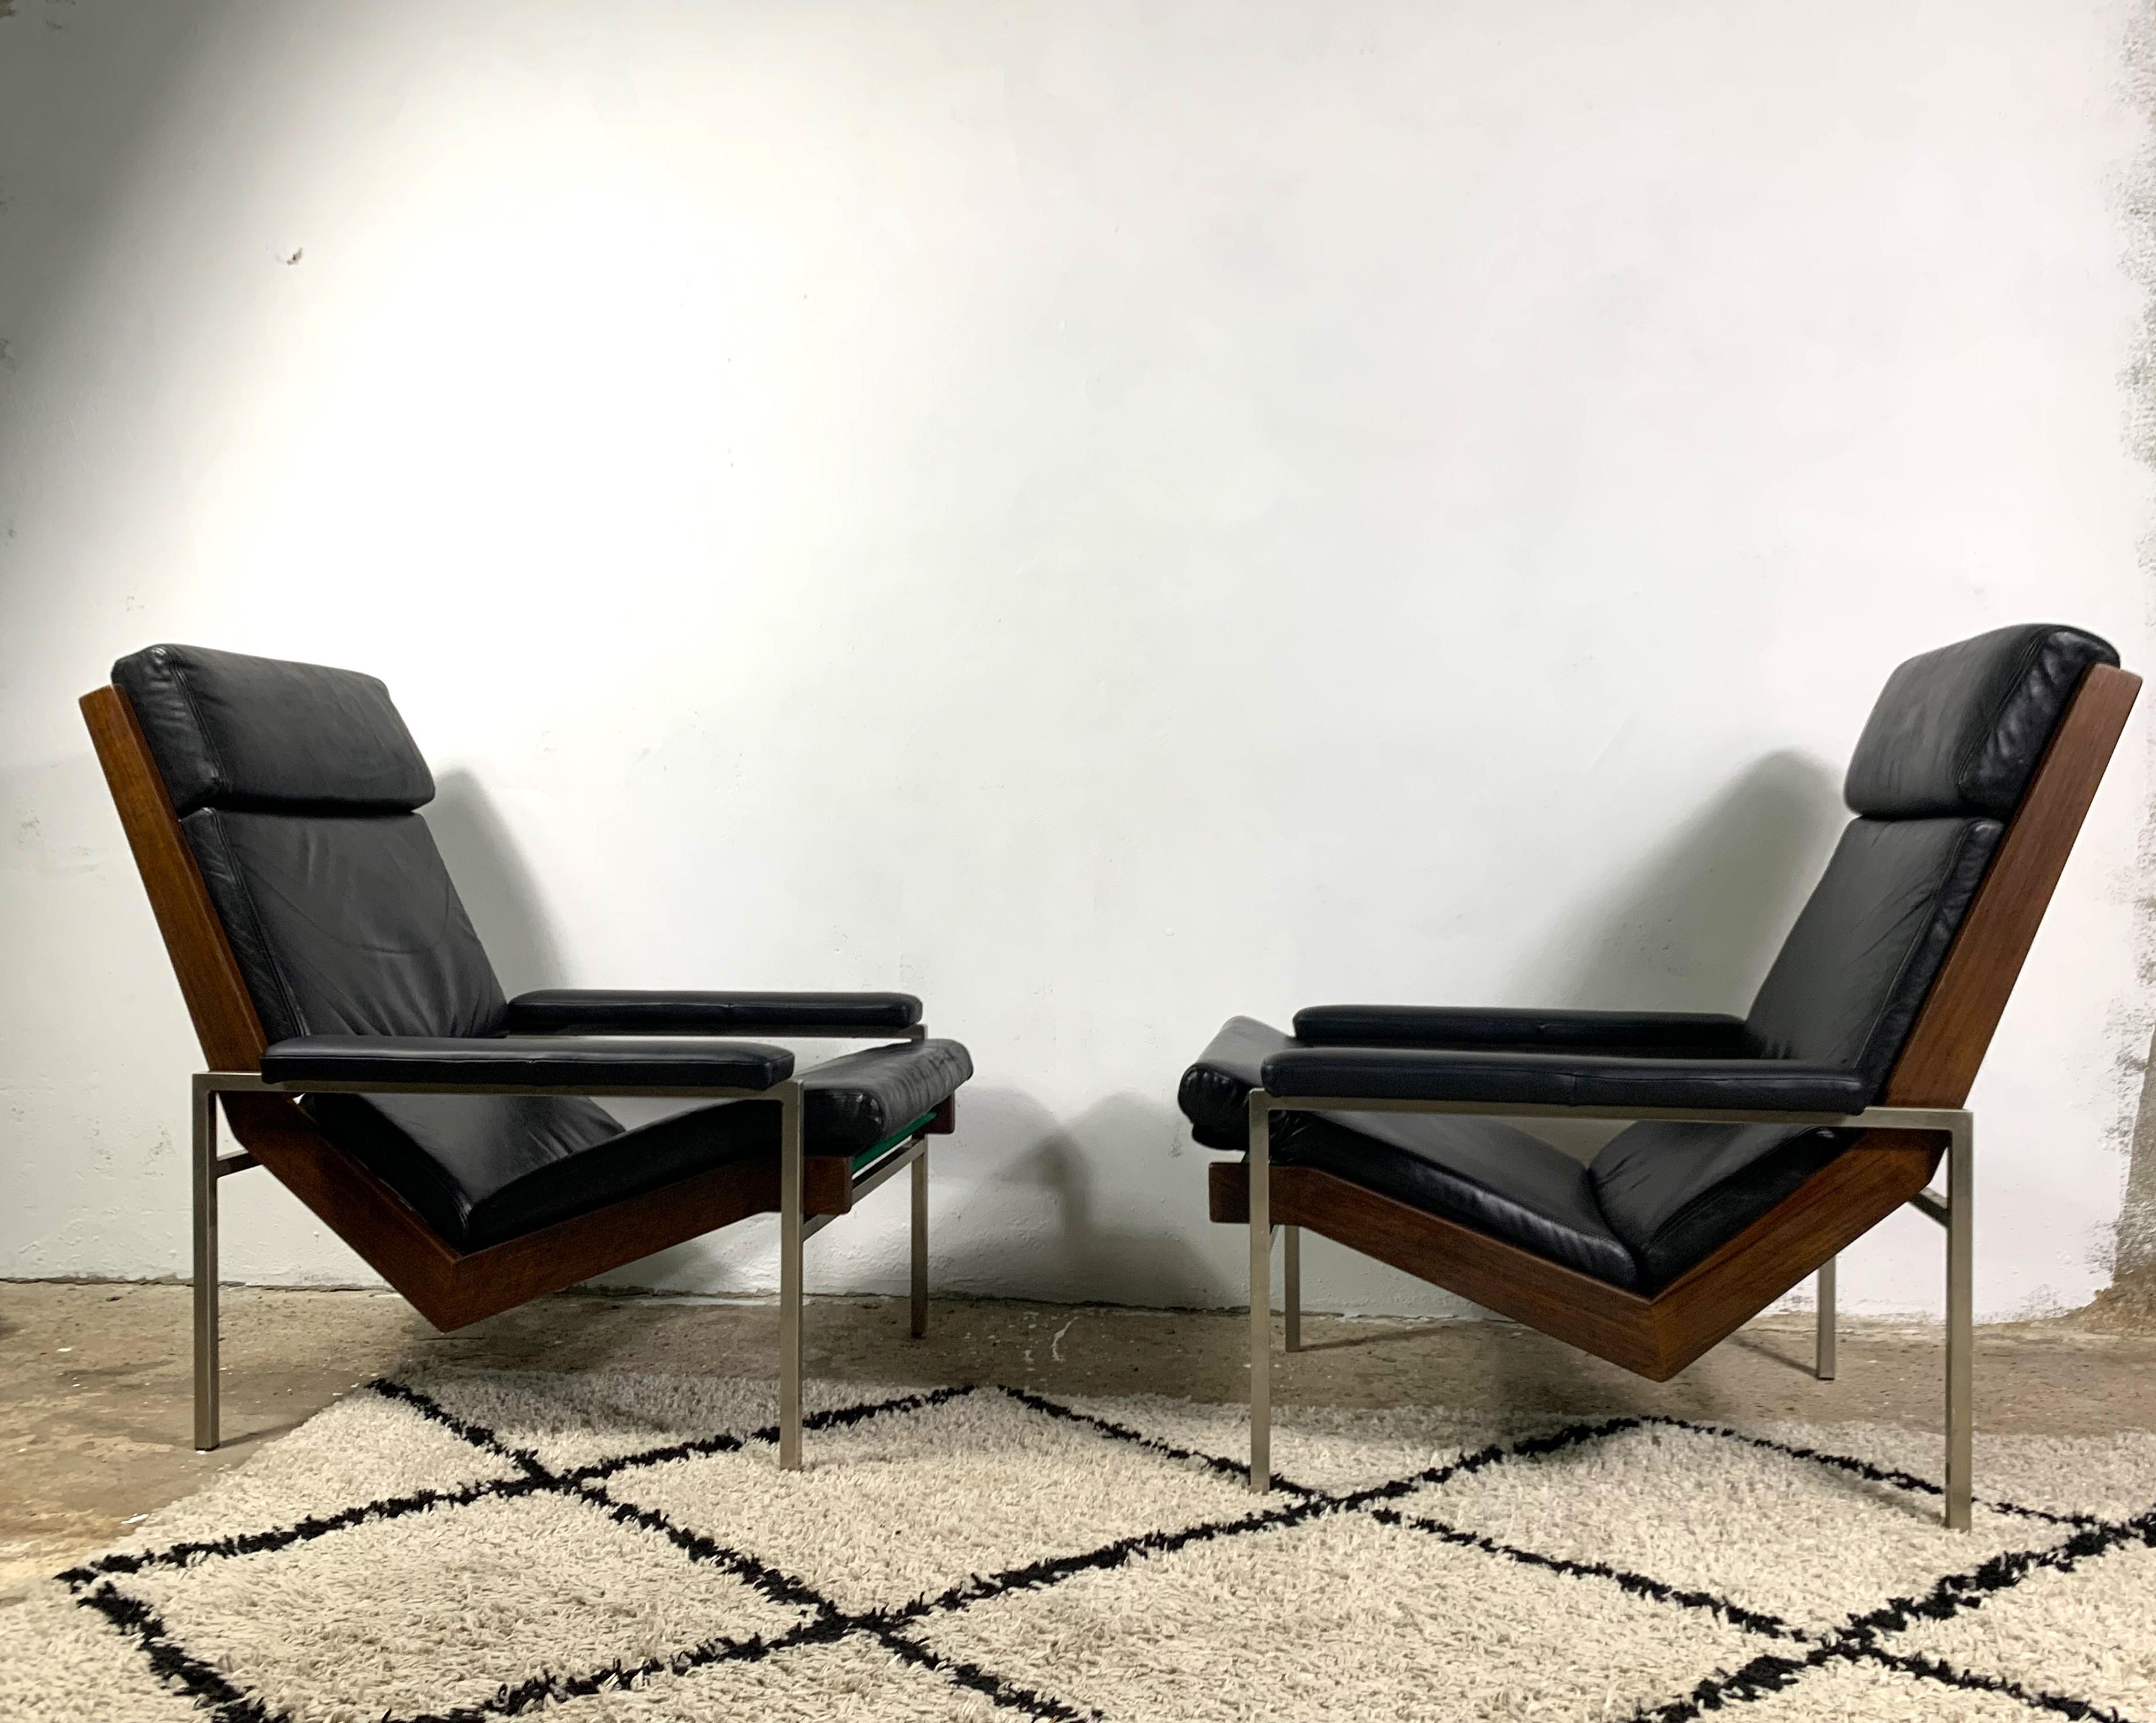 Scandinavian Modern Rob Parry Lotus Armchairs, Rosewood And Leather, 1960s For Sale